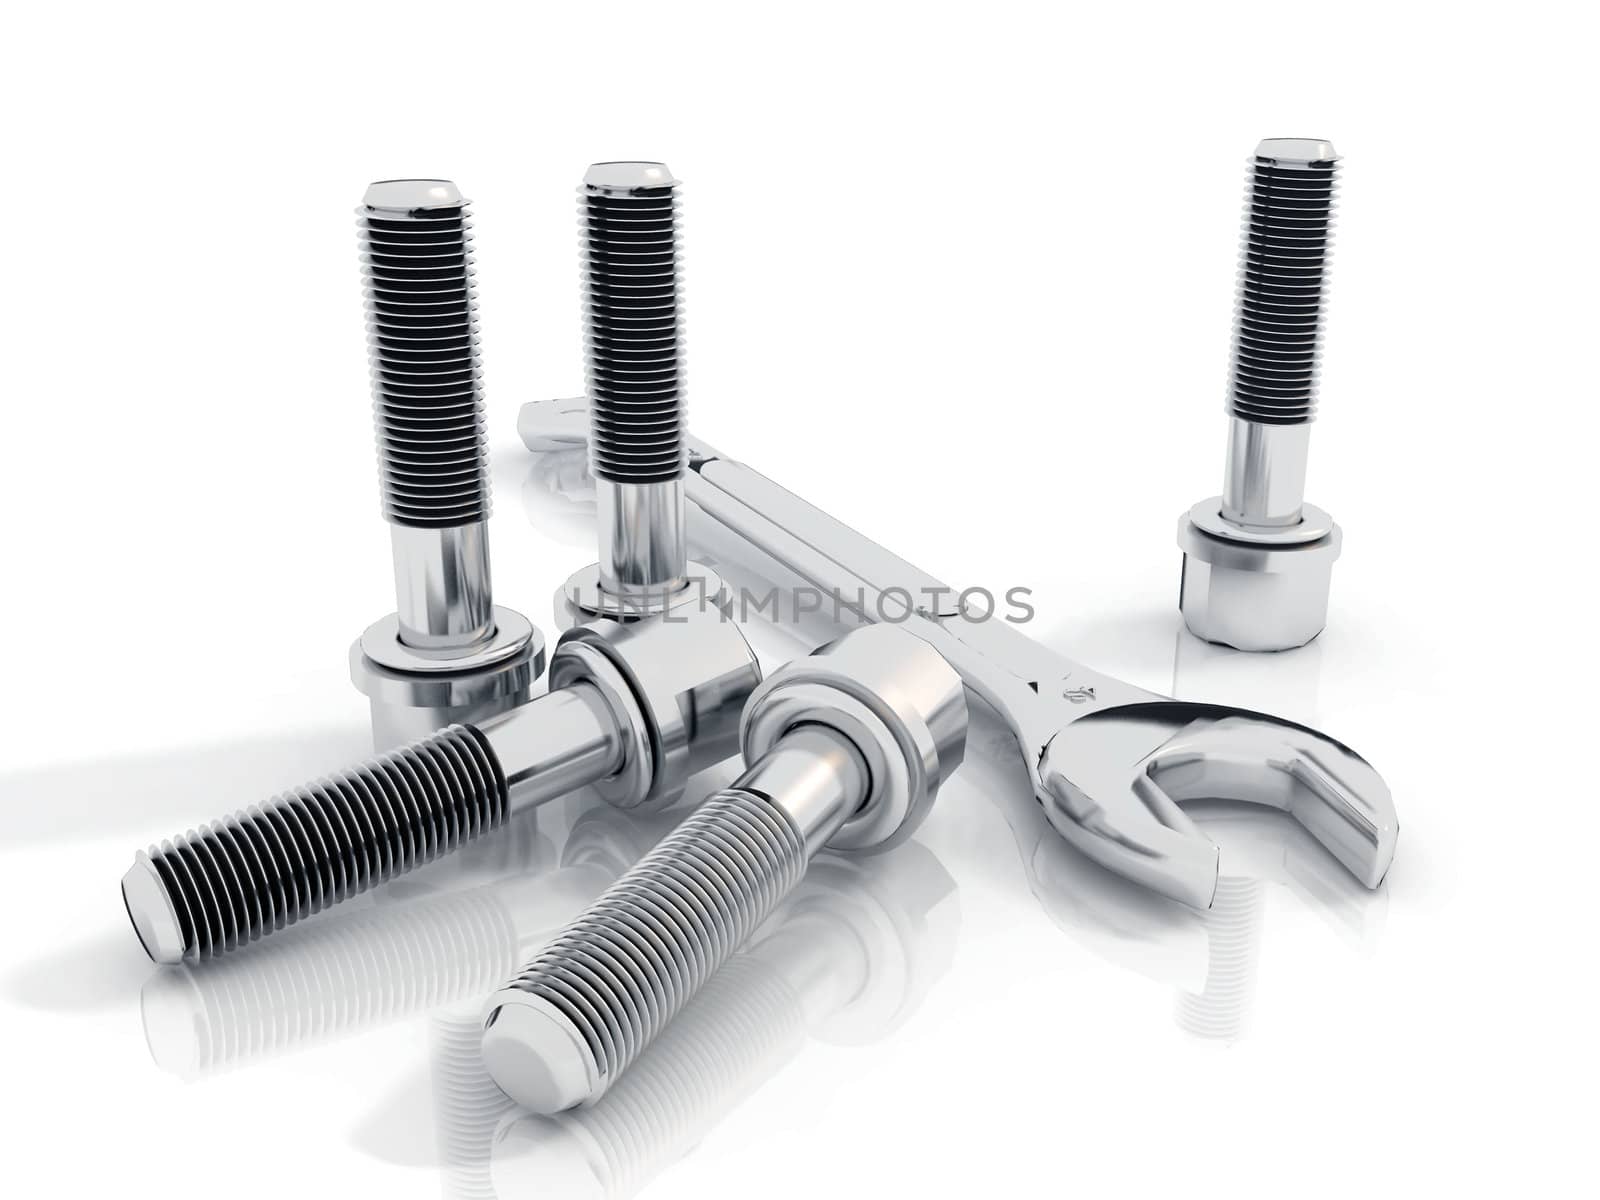 bolts  and wrench on white background